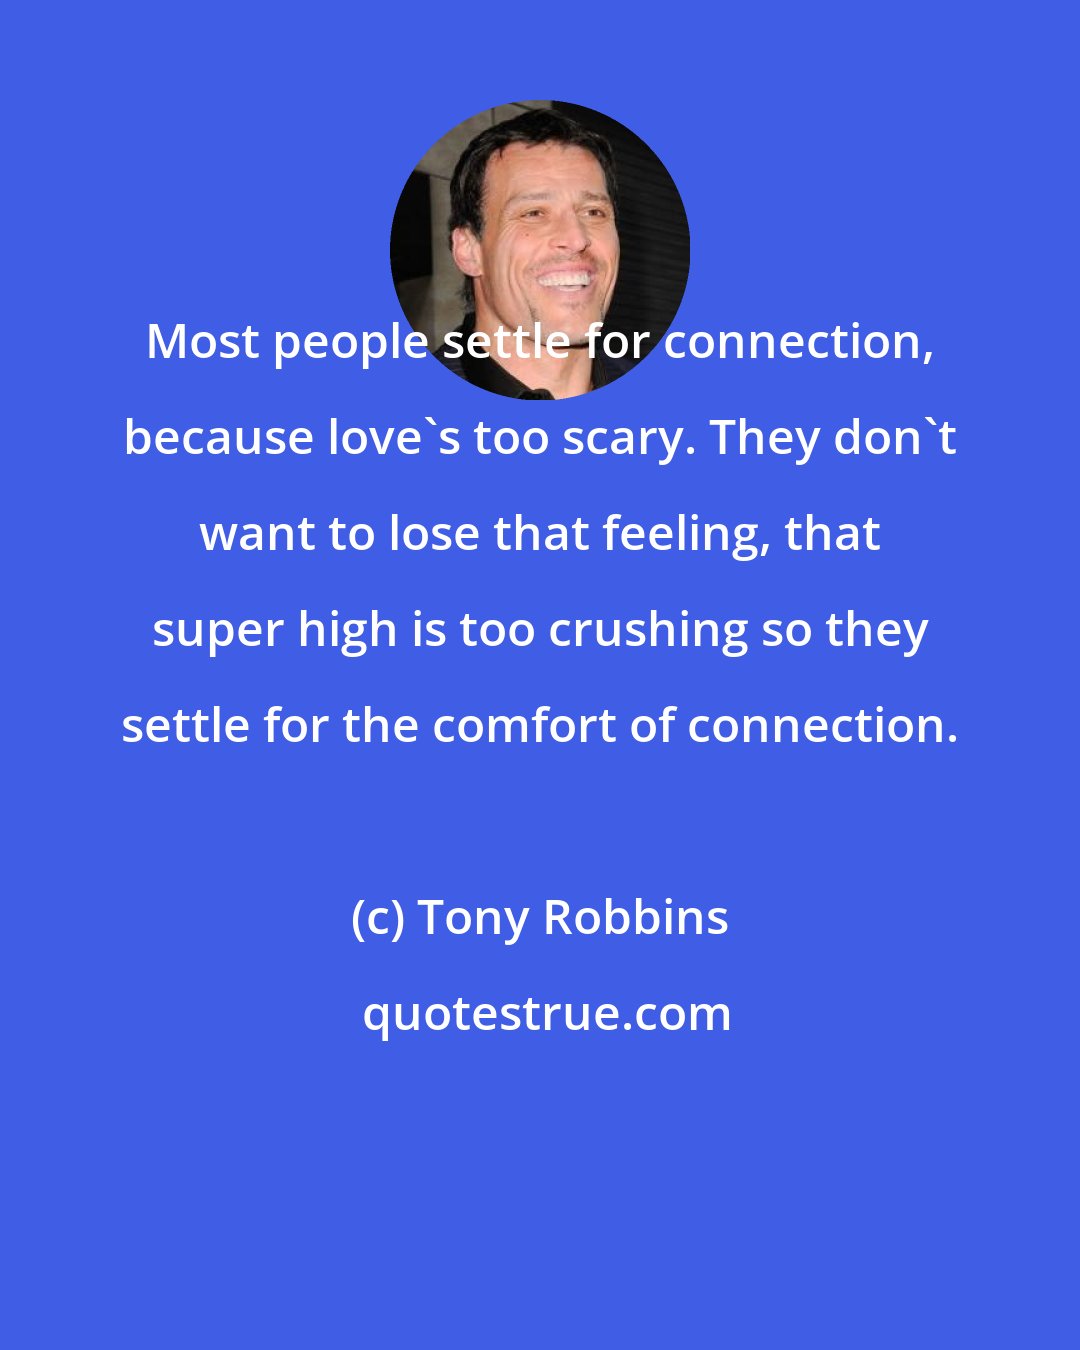 Tony Robbins: Most people settle for connection, because love's too scary. They don't want to lose that feeling, that super high is too crushing so they settle for the comfort of connection.